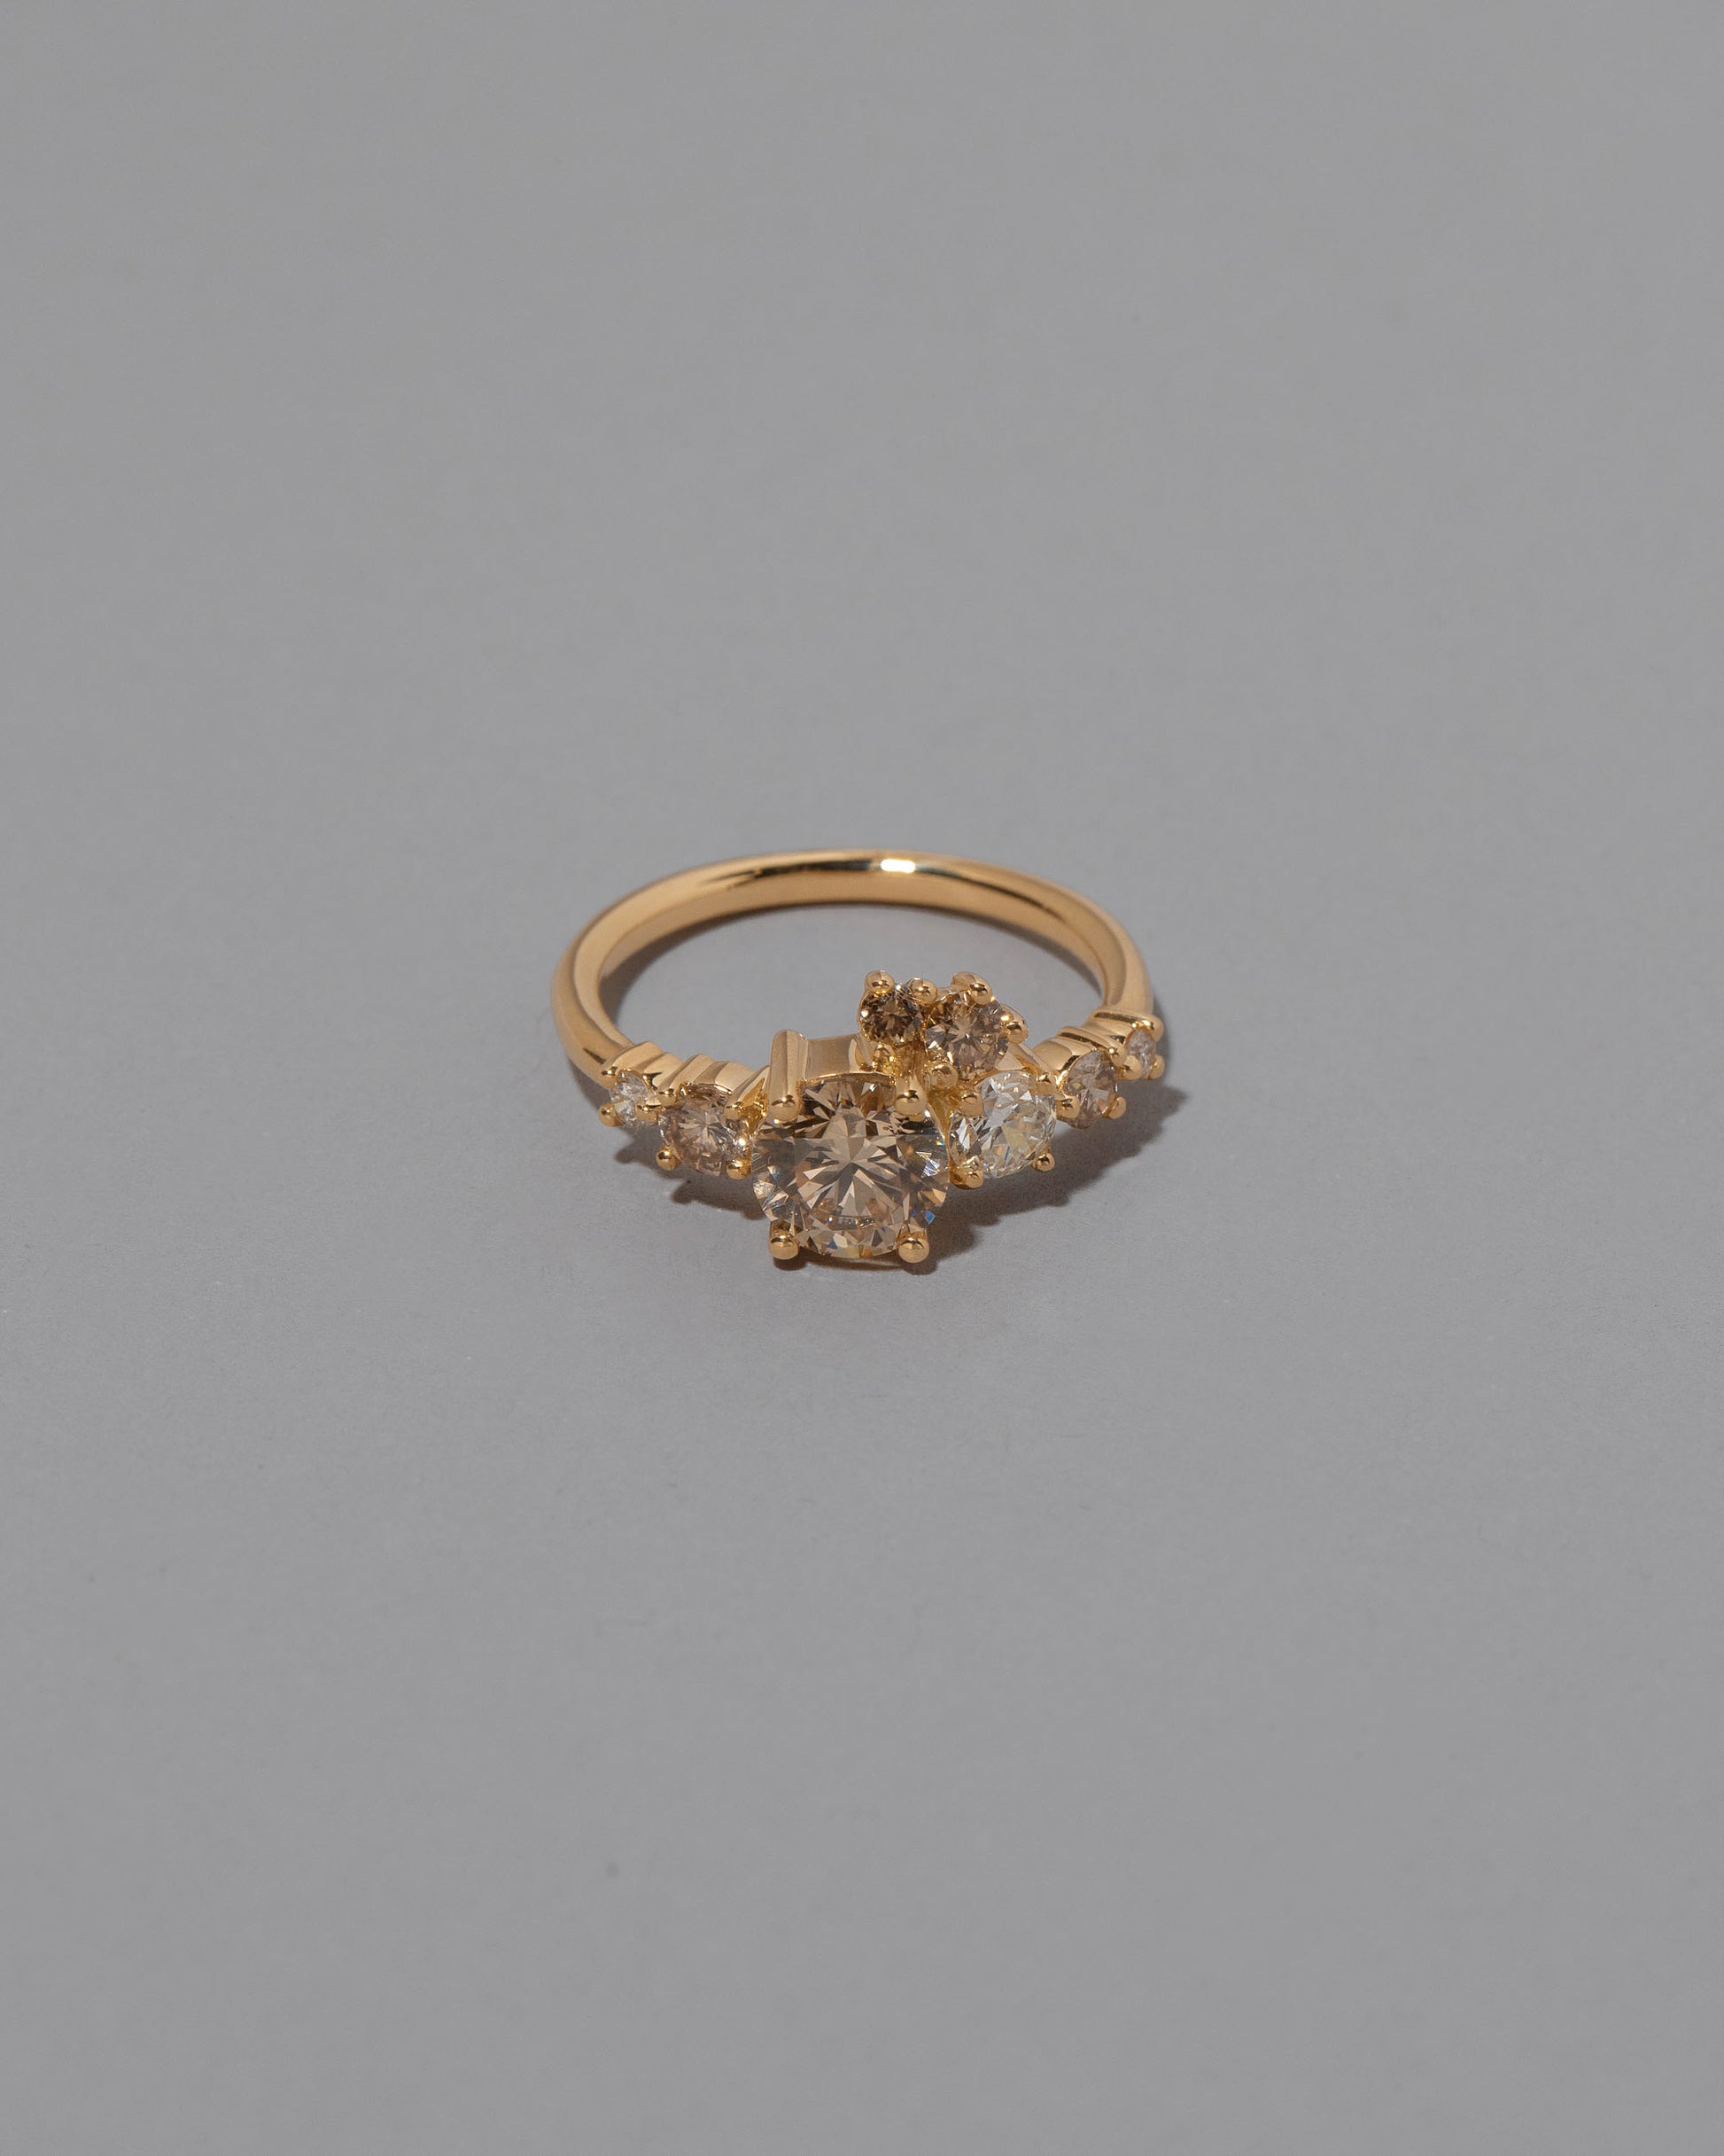 Champagne Diamond Luna Ring on grey color background.